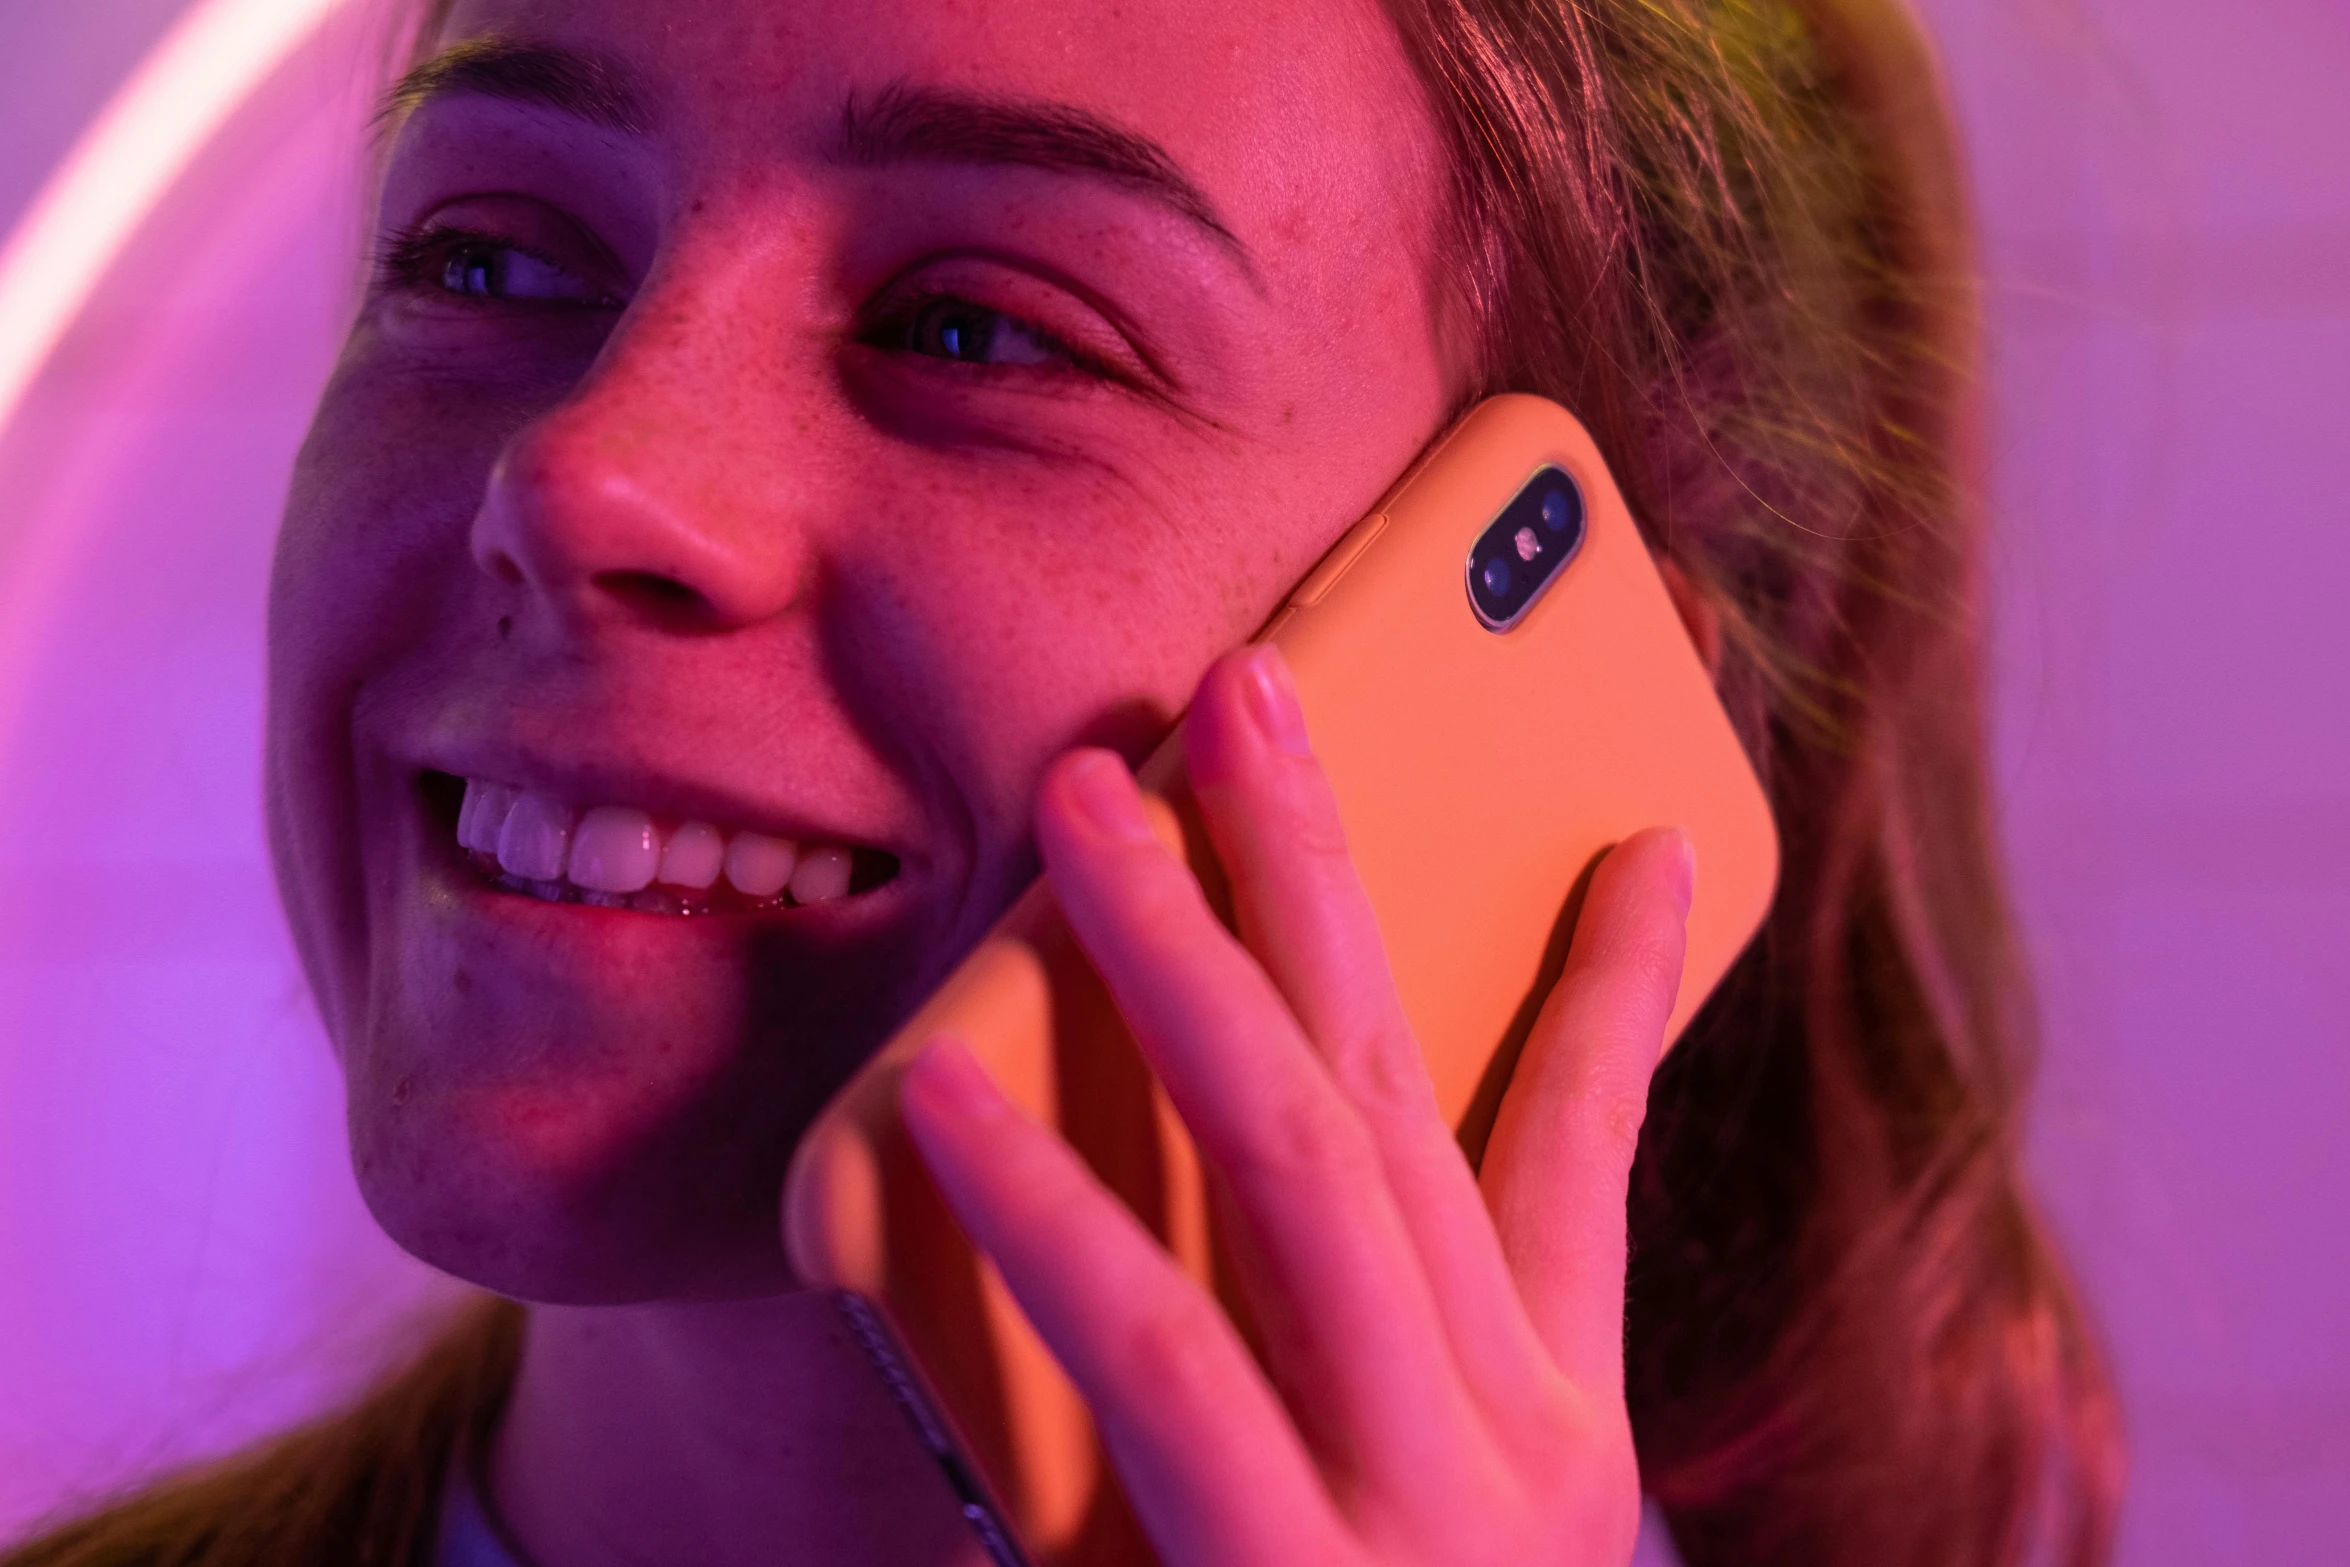 a close up of a person talking on a cell phone, some orange and purple, during the night, happy girl, press shot